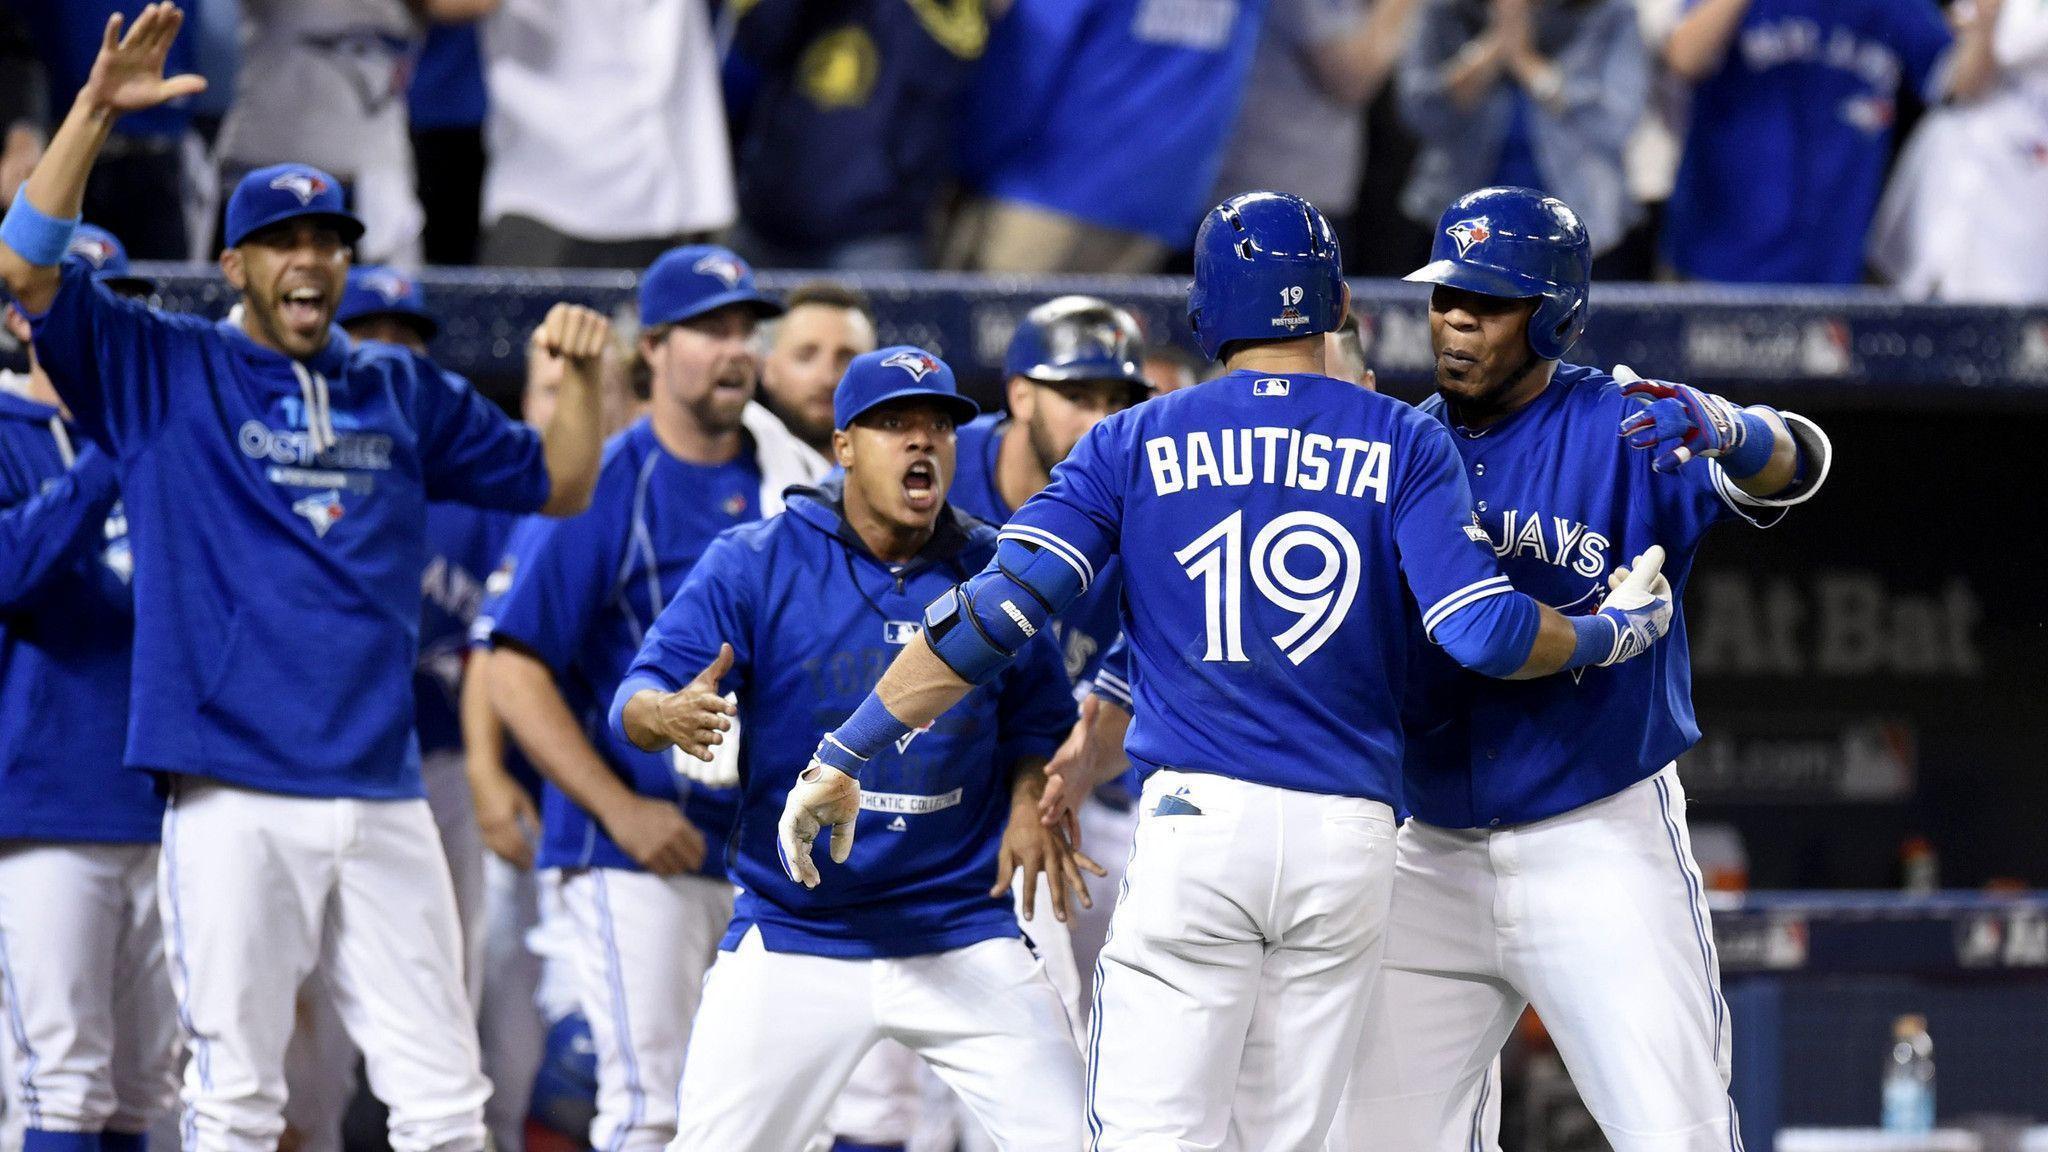 Blue Jays beat Rangers, 6- in emotional Game 5 to win division